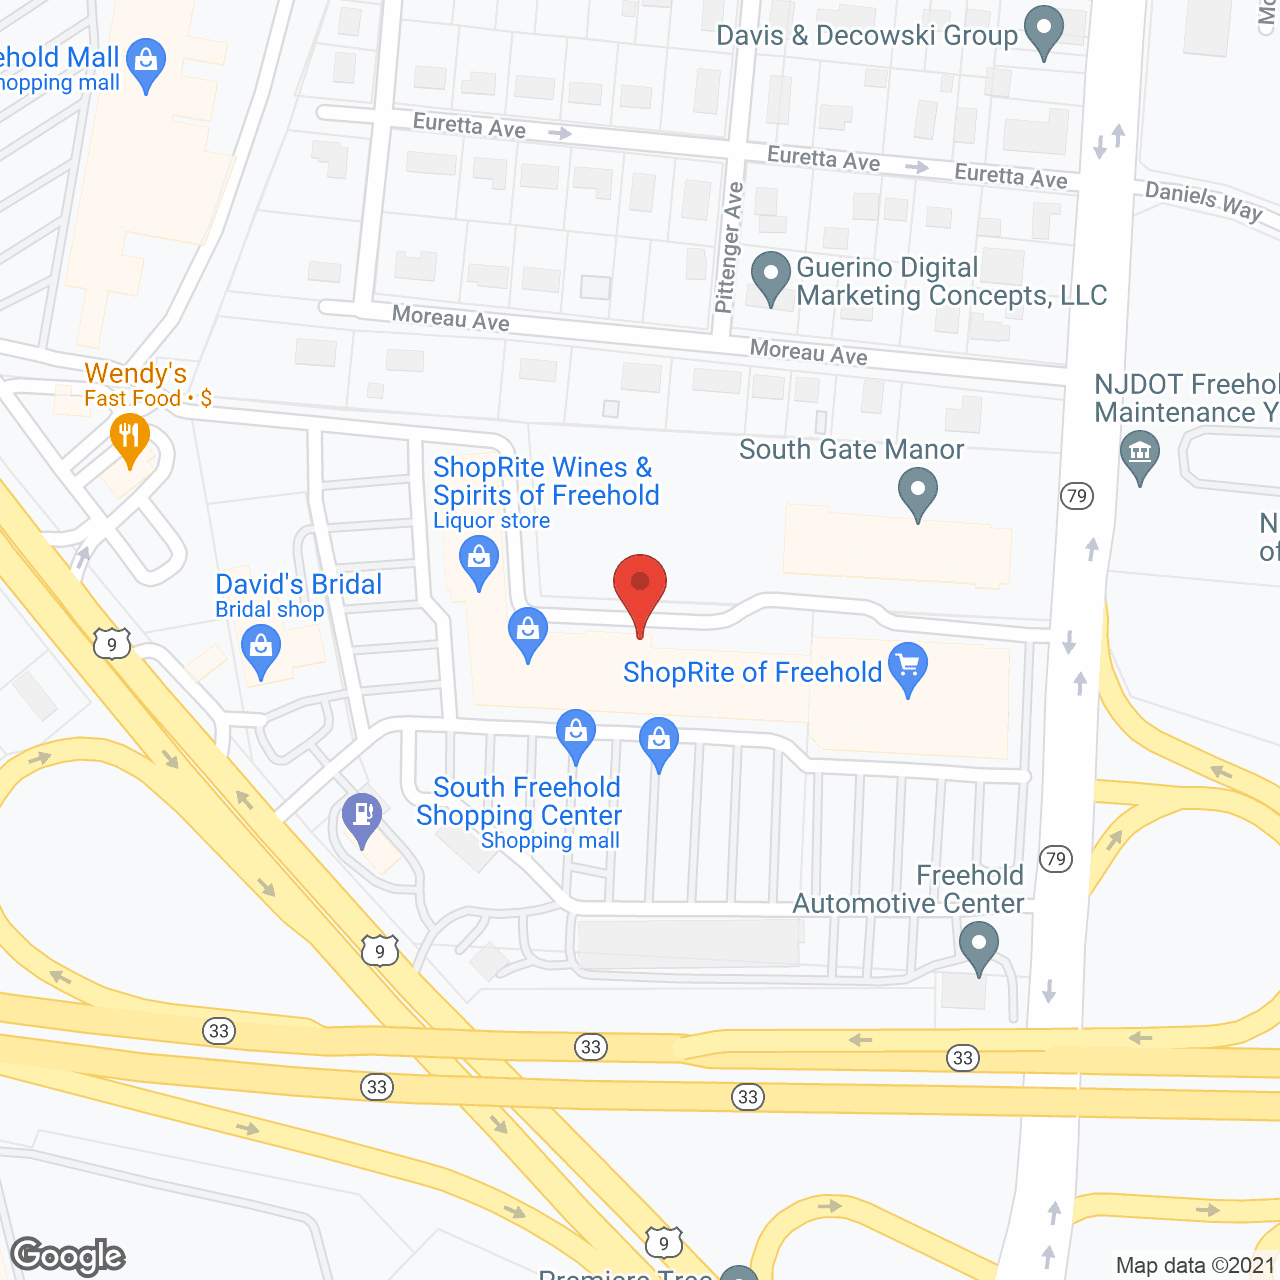 ACLA Health Care Services in google map